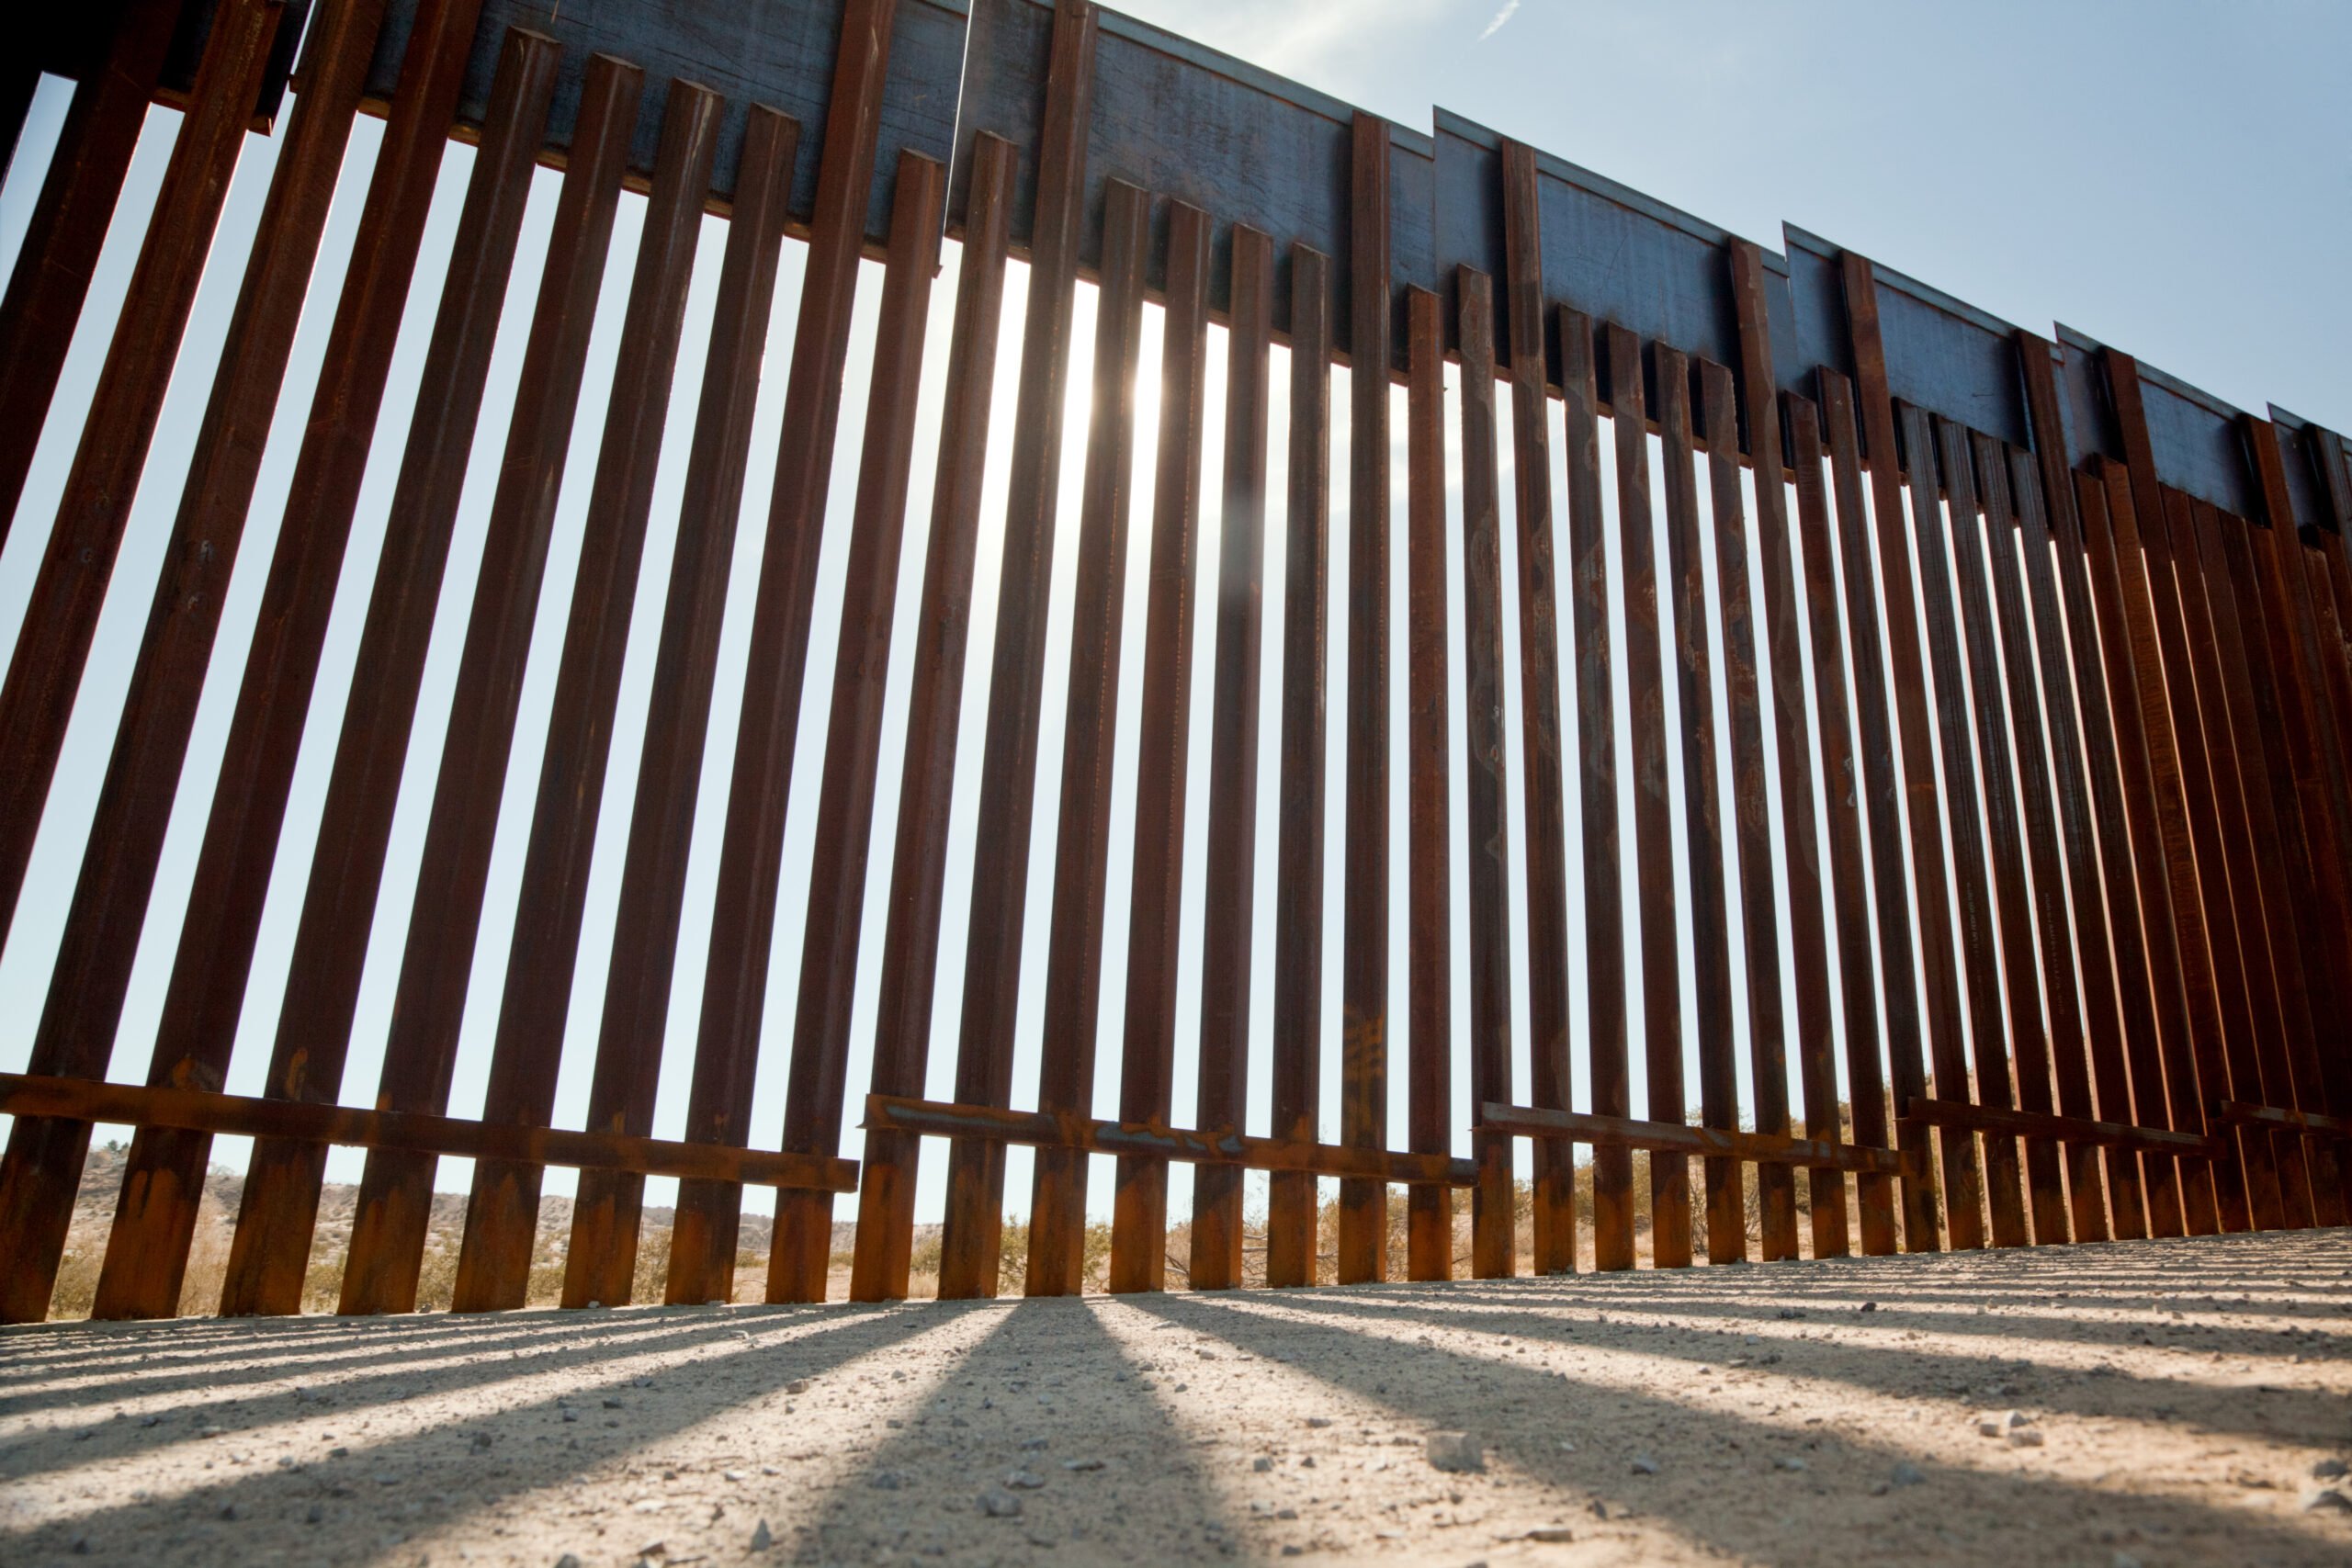 A ground level view of the wall at the U.S / Mexico border, standing under the sun in the desert.